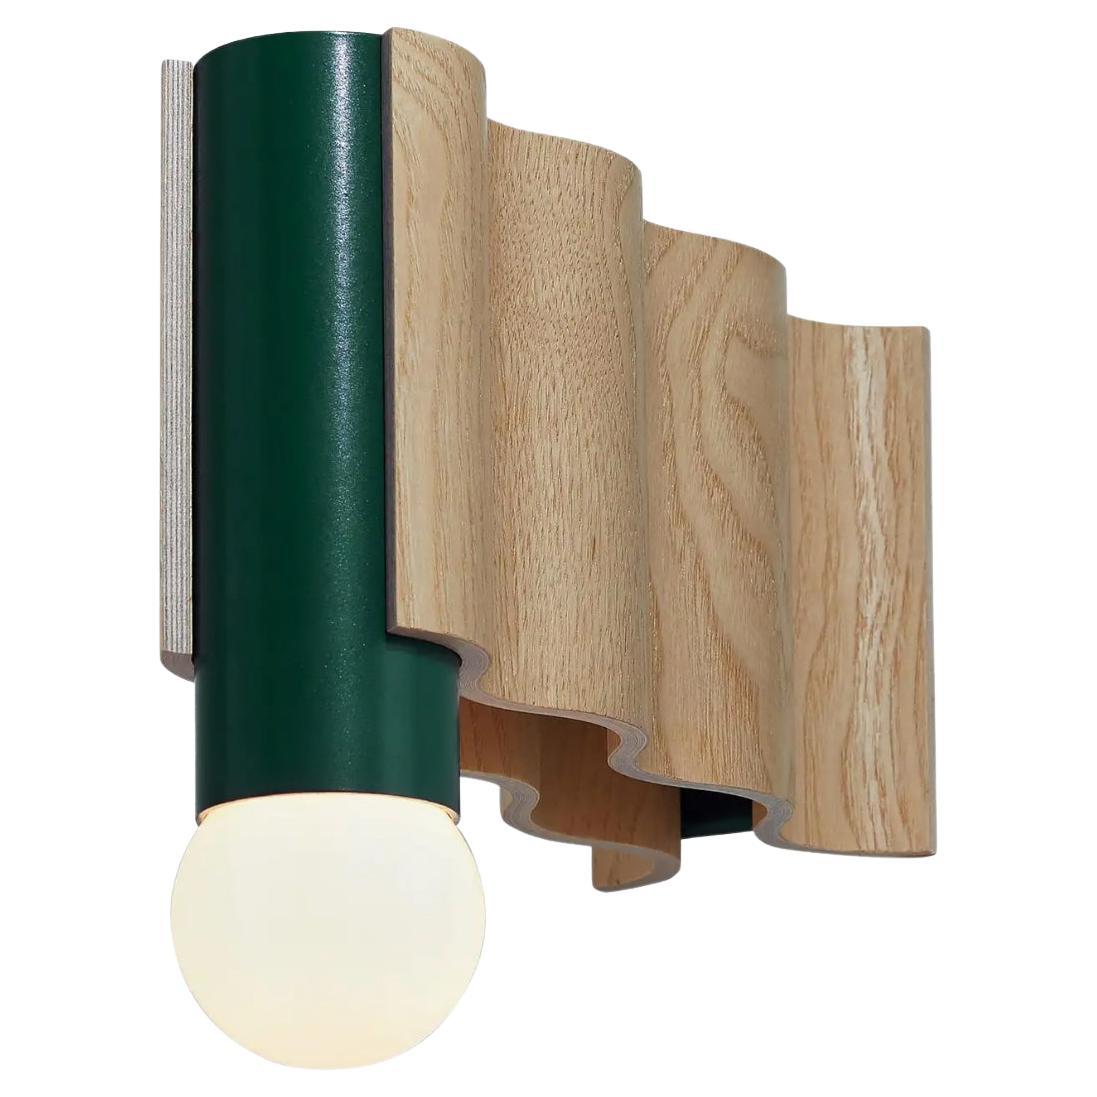 Single Corrugation Sconce / Wall Light in Natural Ash Veneer and Moss Green